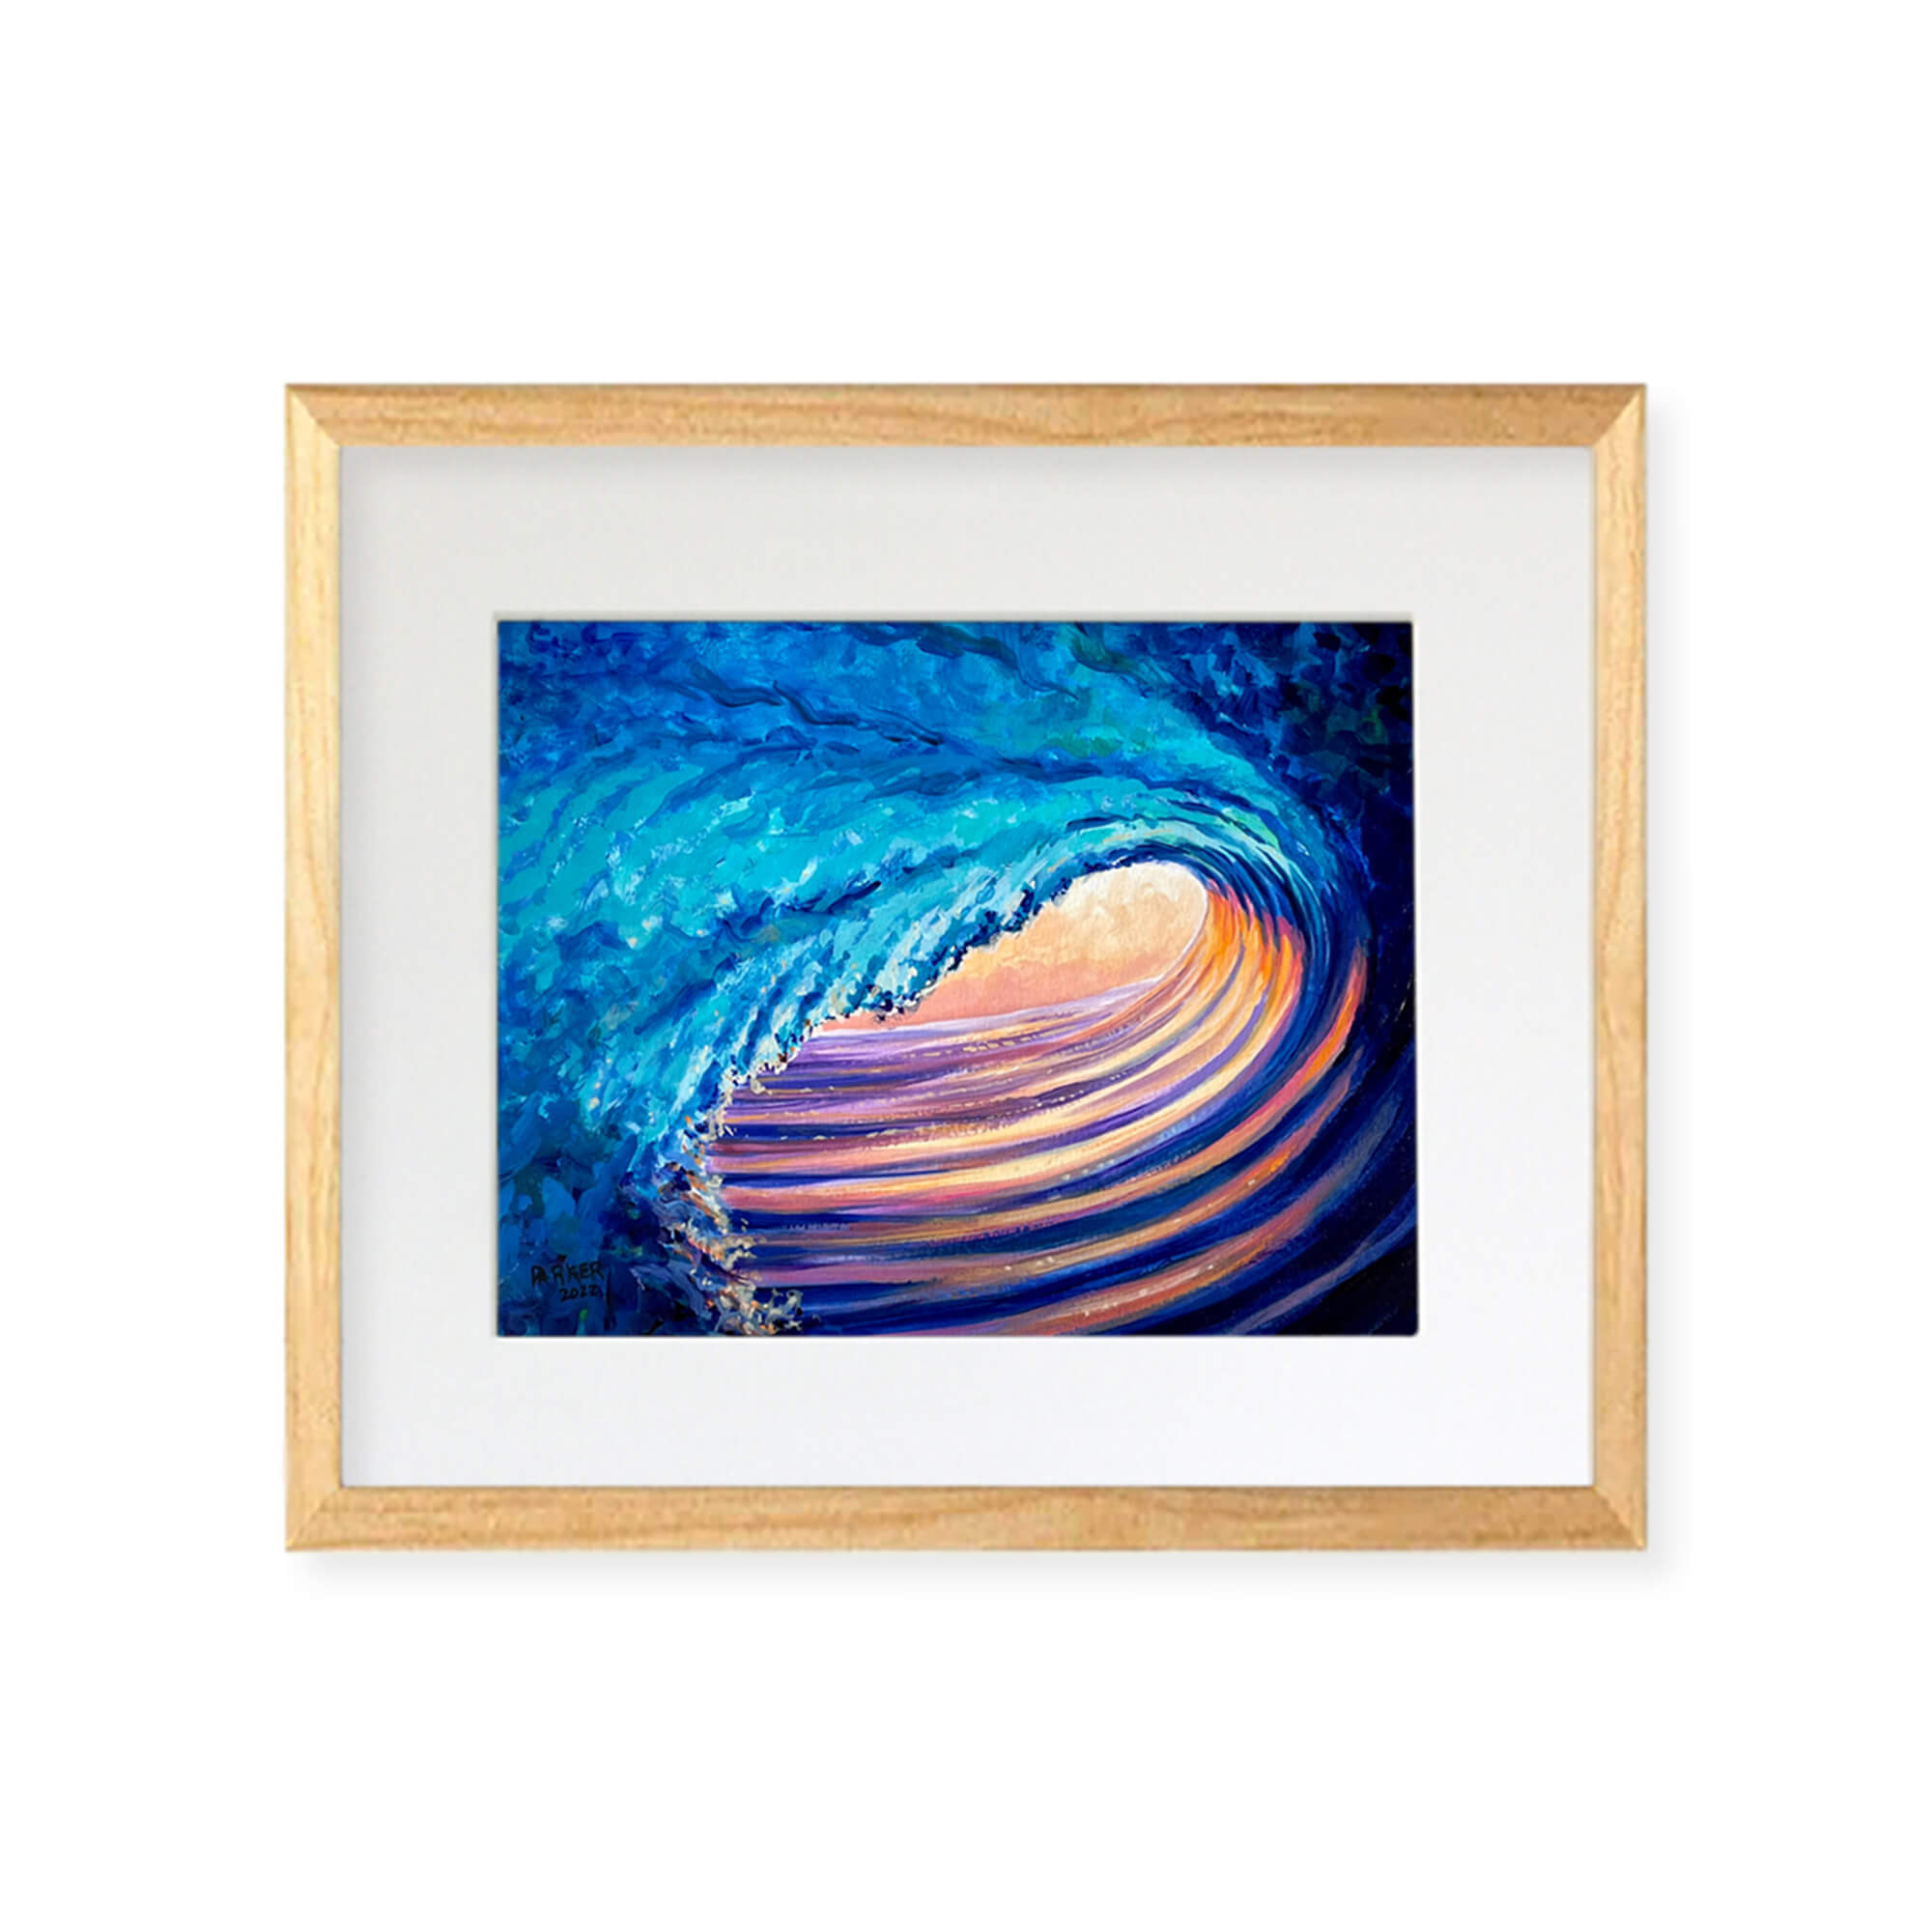 Sunset as seen from a wave barrel by Surf artist Patrick Parker